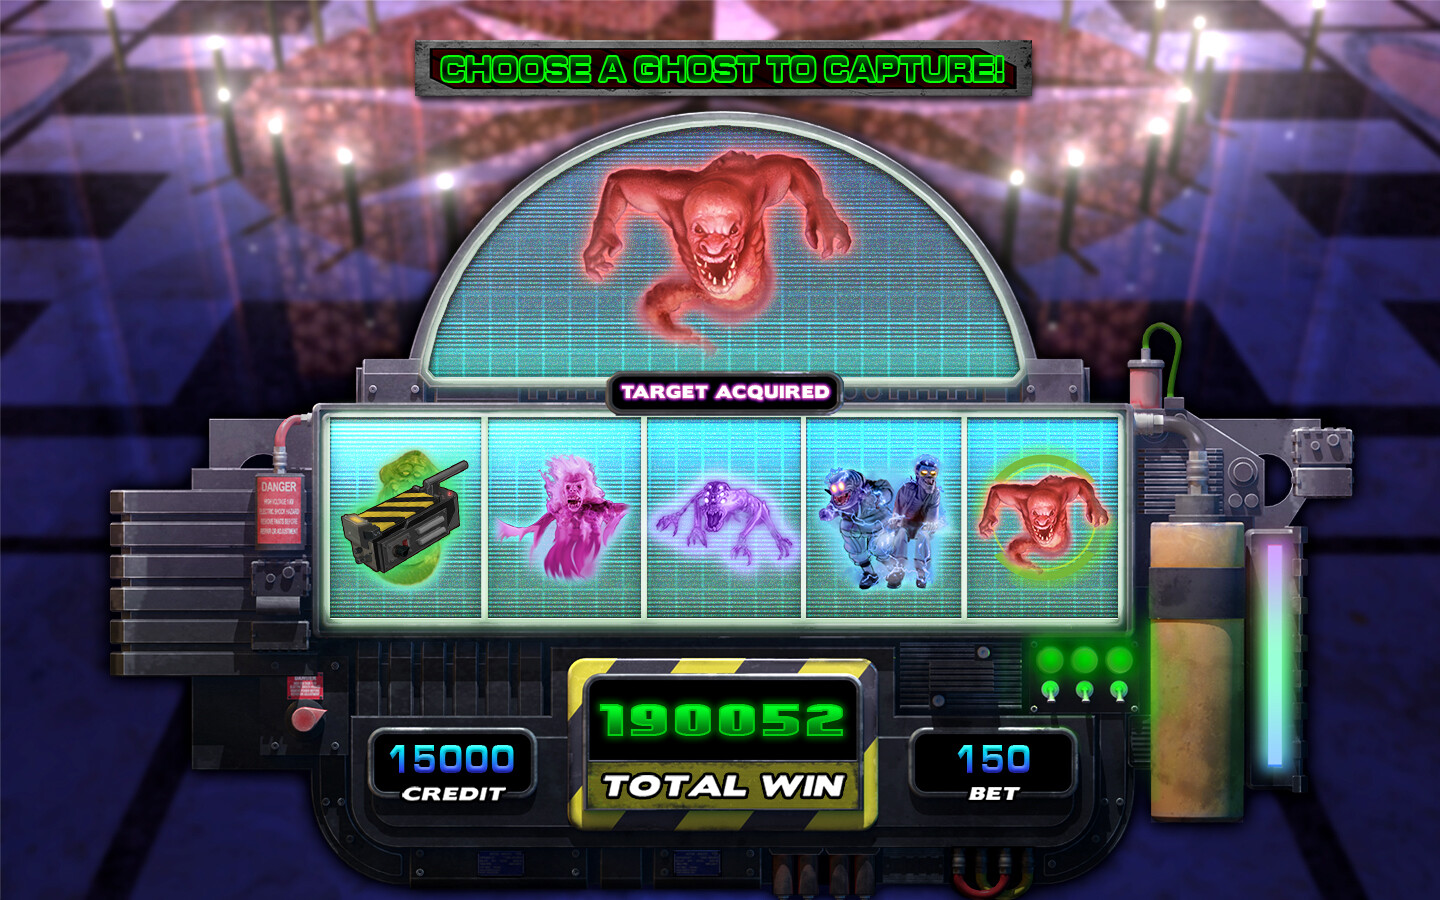 Ghostbusters Slot Machine game - Lower player screen